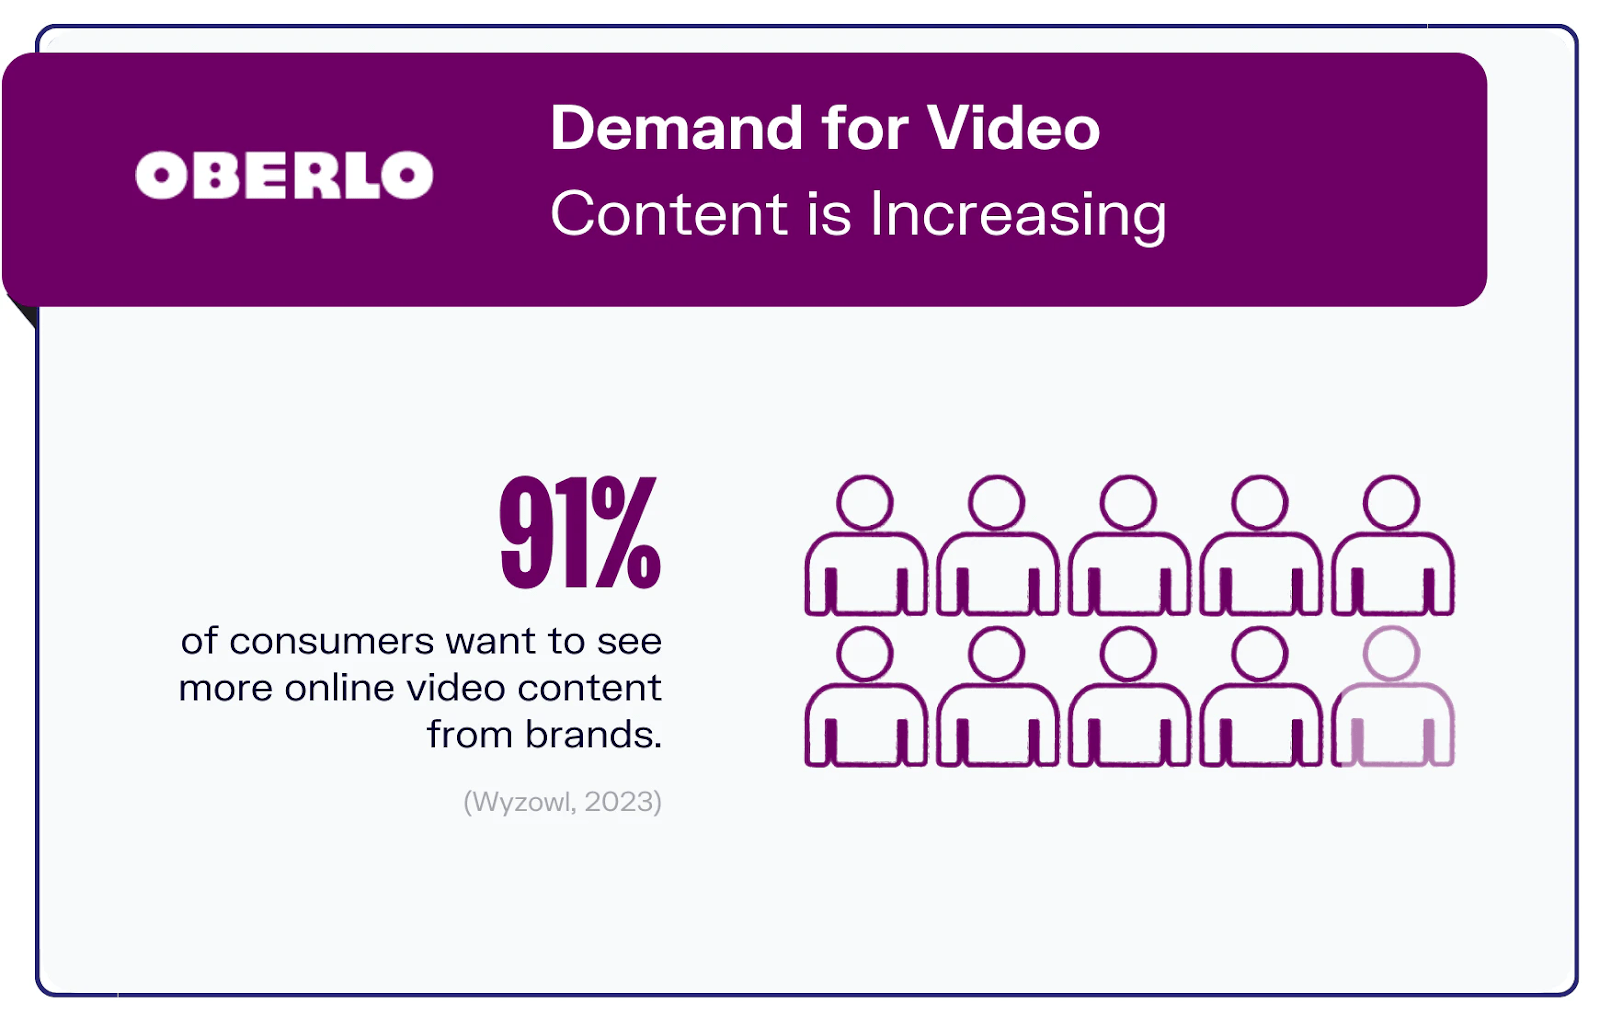 Oberlo statistics about demand for video content